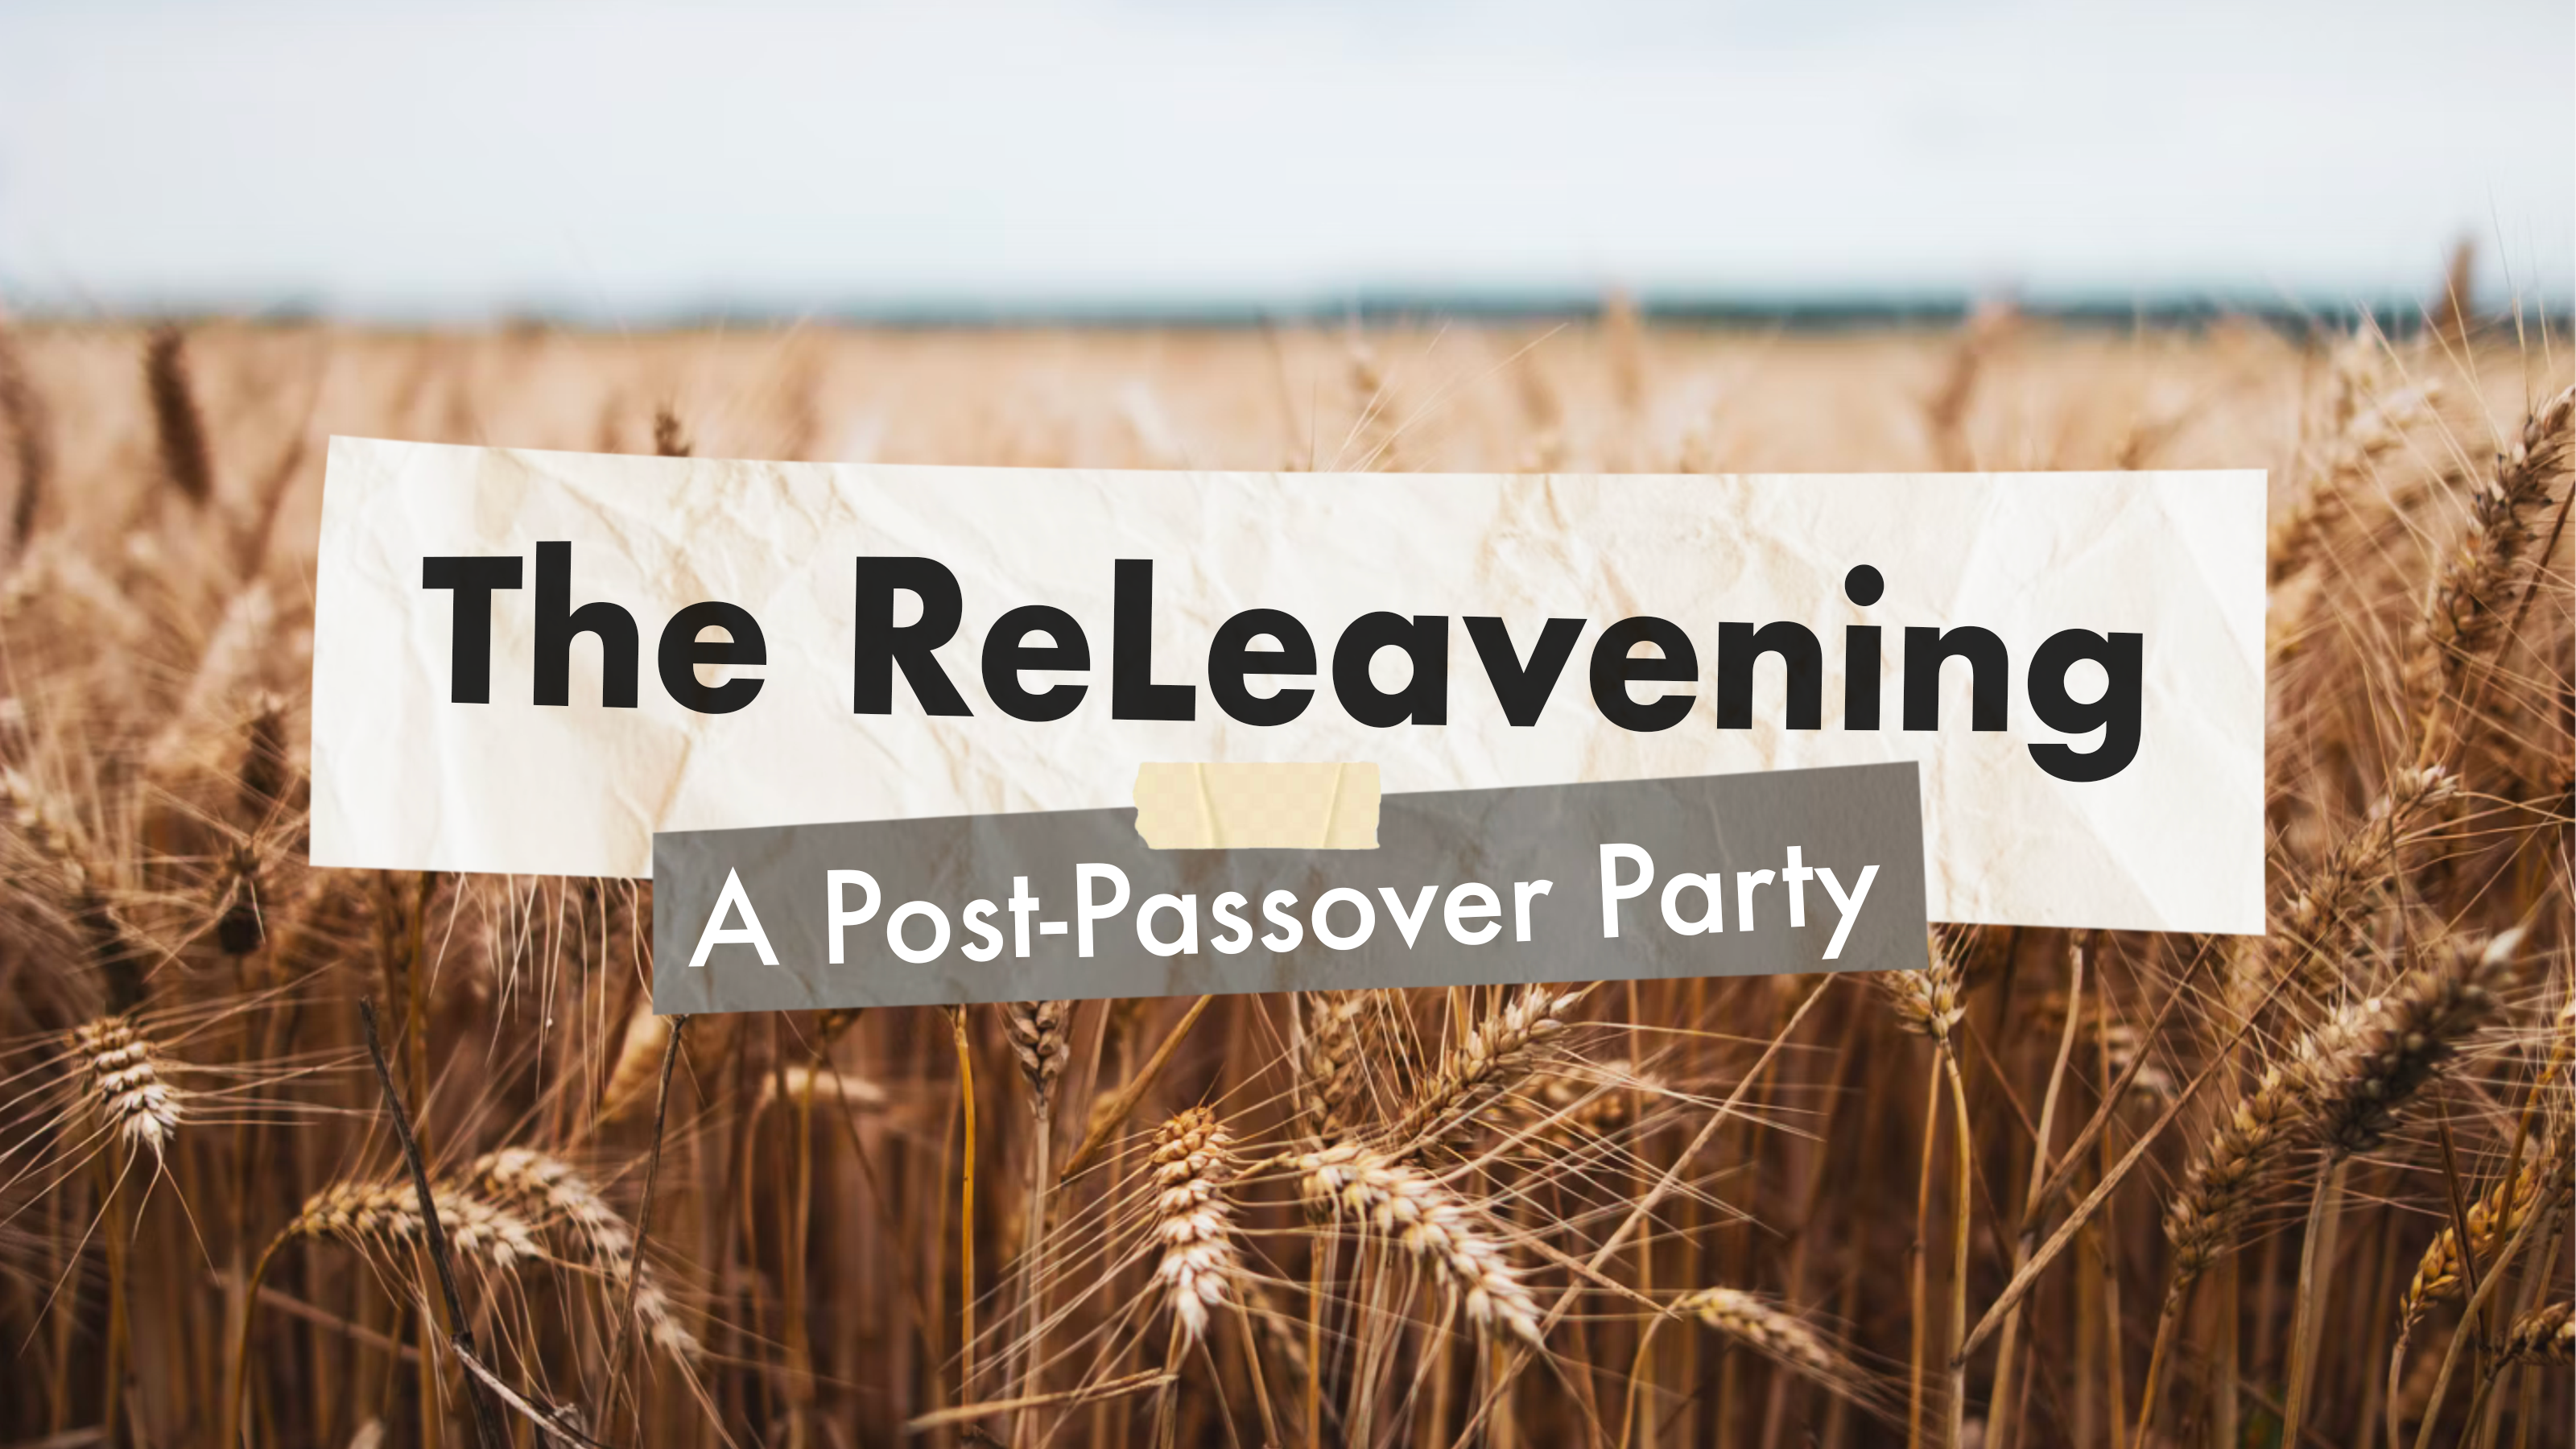 The Releavening: A Post-Passover Party (Field of grain with copy over it as though it was typed on paper)